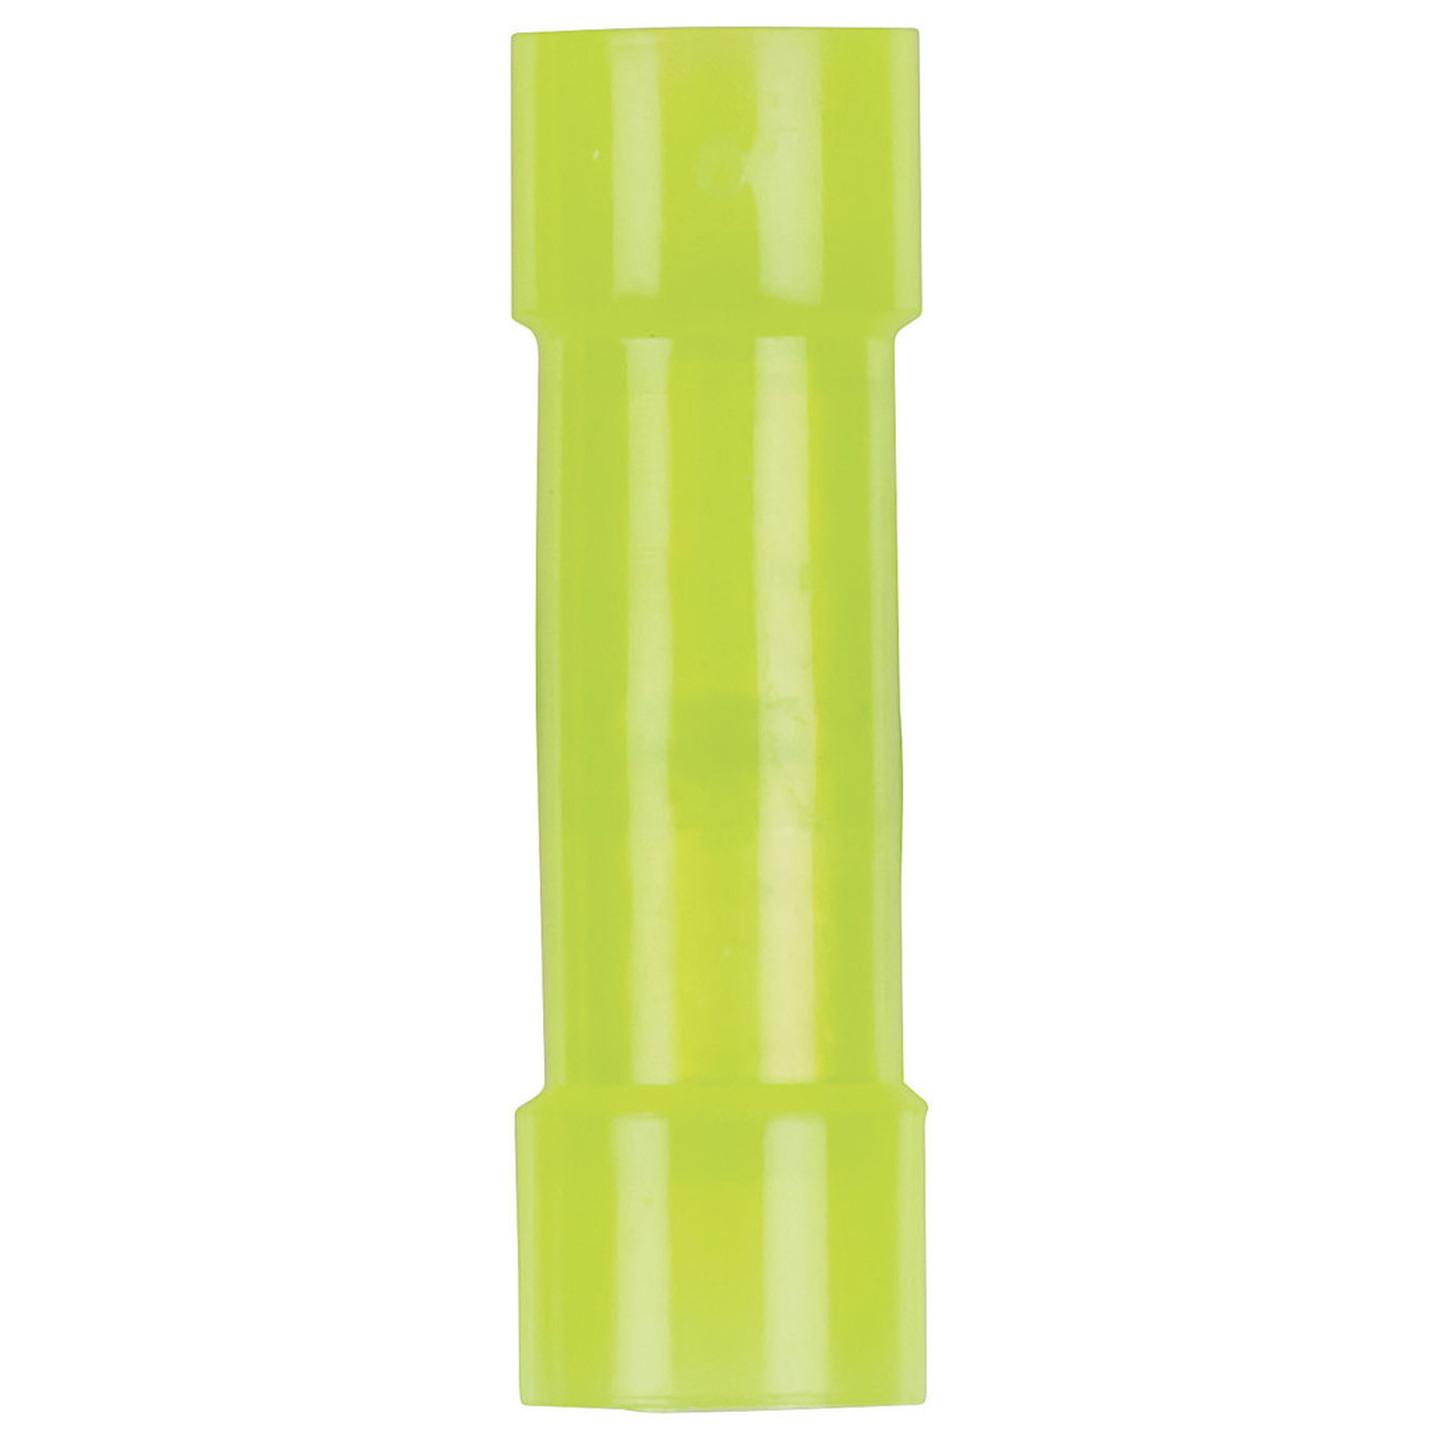 Butt Connector - Yellow - Pack of 8